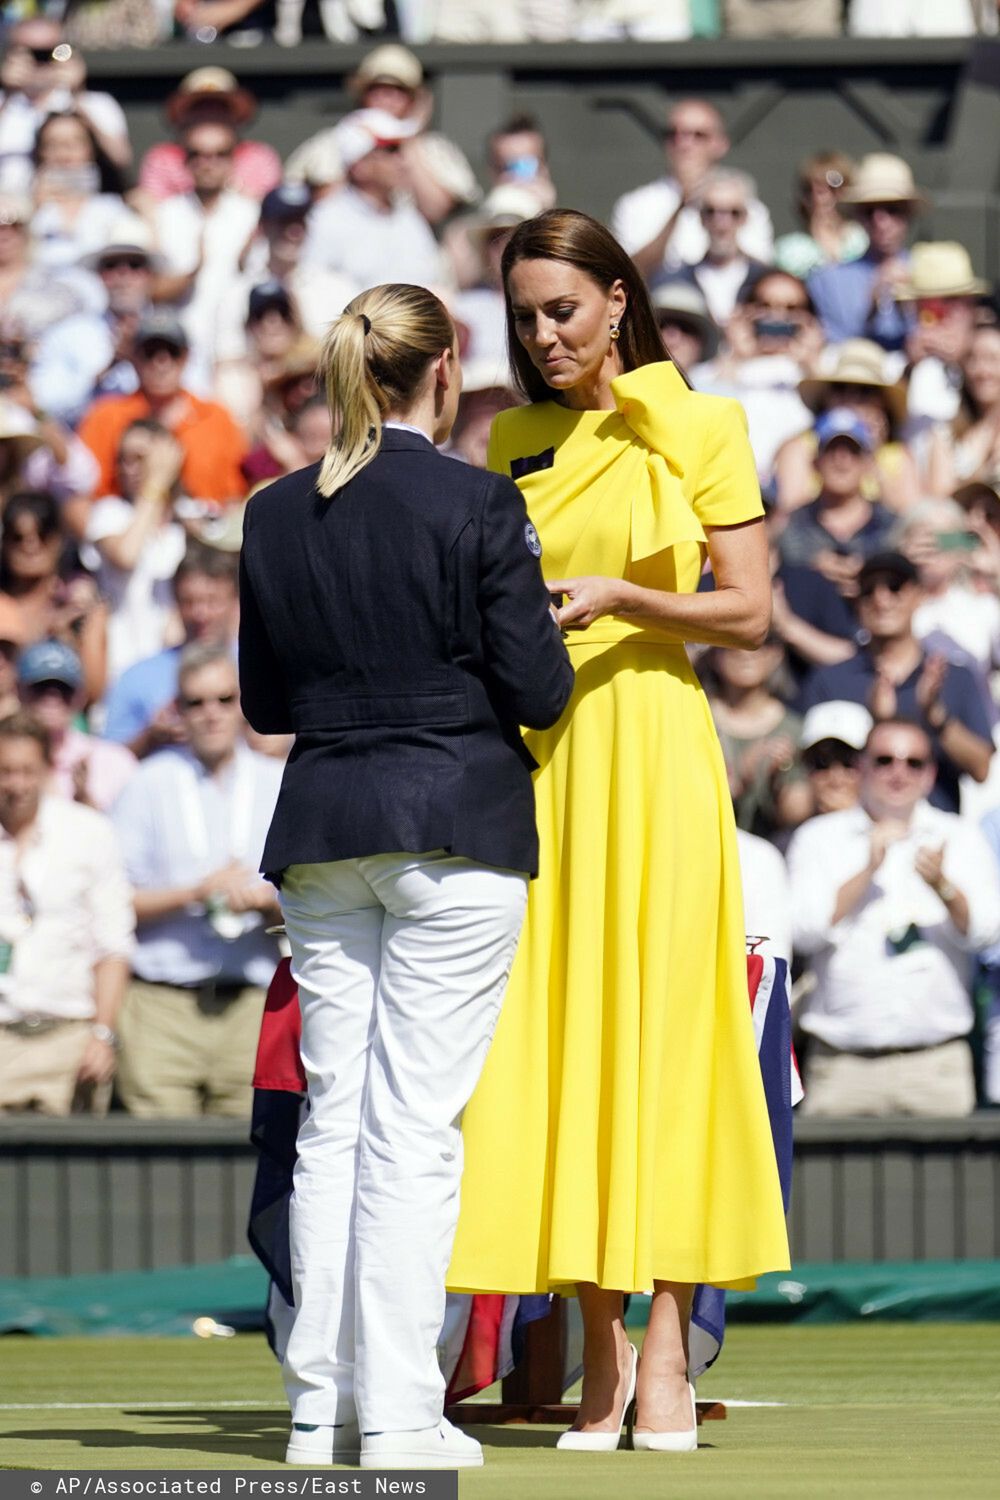 Britain's Kate, Duchess of Cambridge speaks with the umpire after the women's singles final between Kazakhstan's Elena Rybakina and Tunisia's Ons Jabeur on day thirteen of the Wimbledon tennis championships in London, Saturday, July 9, 2022. (AP Photo/Gerald Herbert)